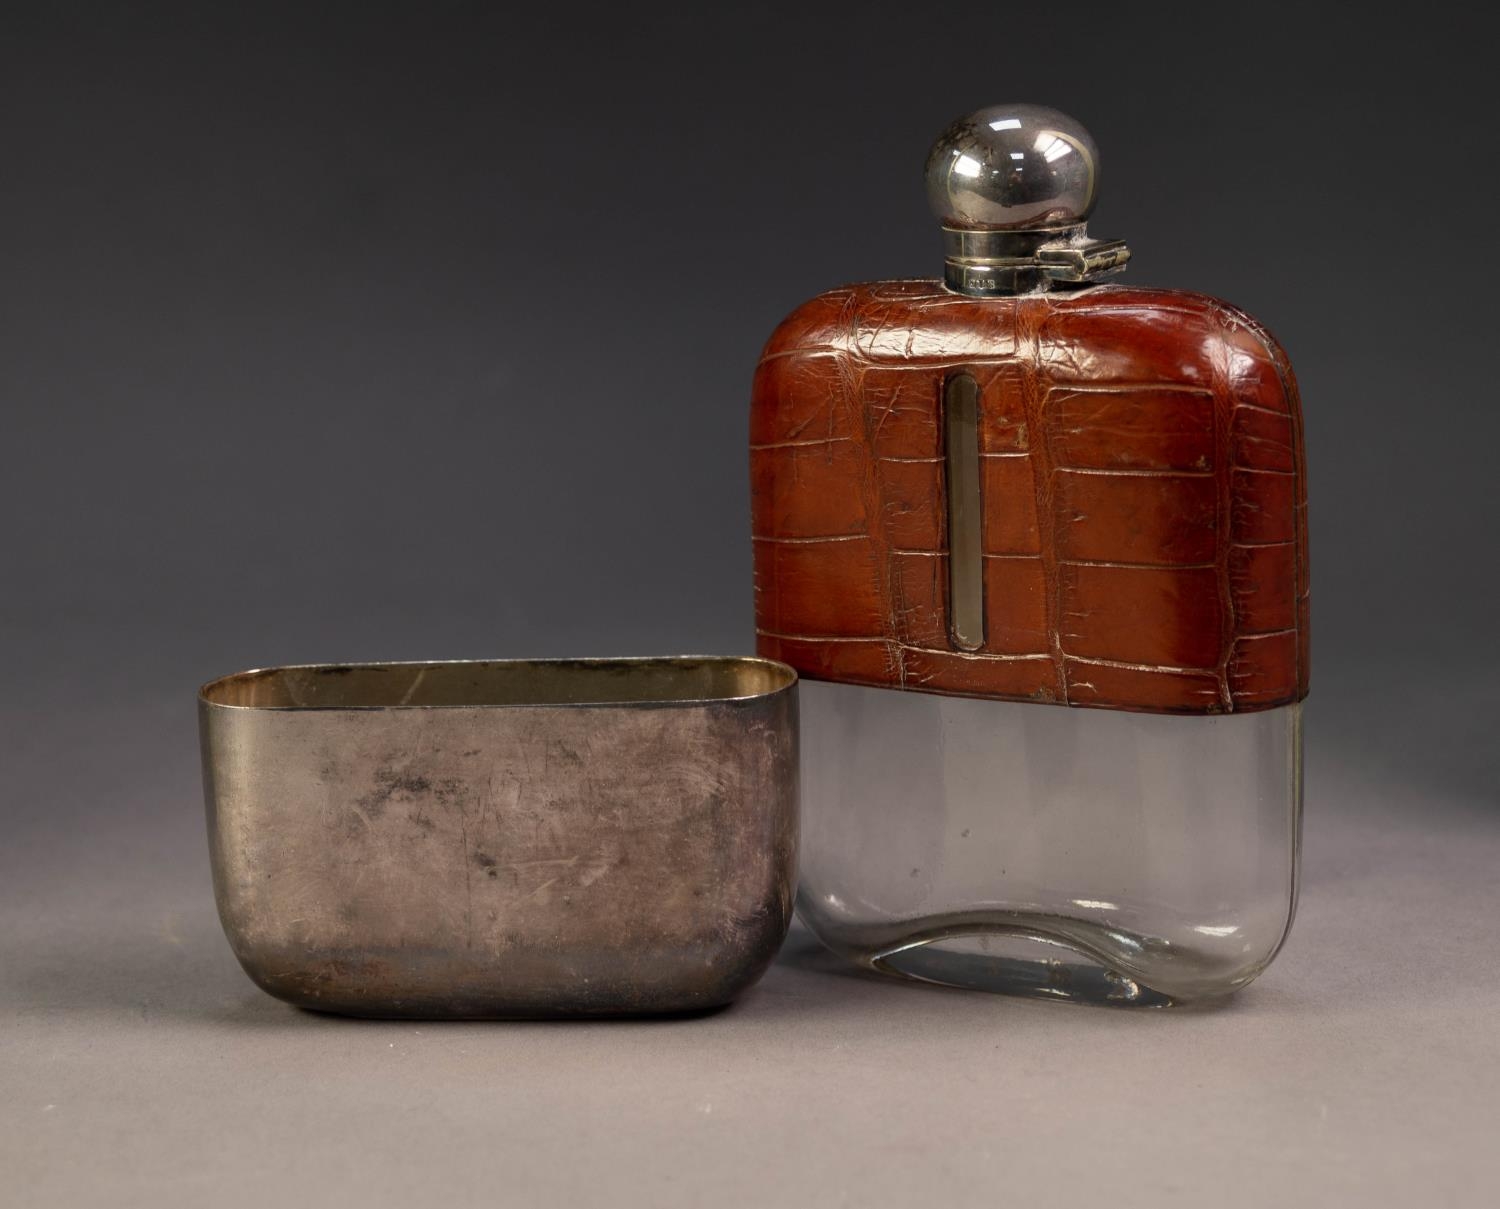 GOOD CROCODILE SKIN CLAD LARGE, 5/8 PINT GLASS HIP FLASK WITH PULL-OFF ELECTROPLATED BASE BY JAMES - Image 3 of 3